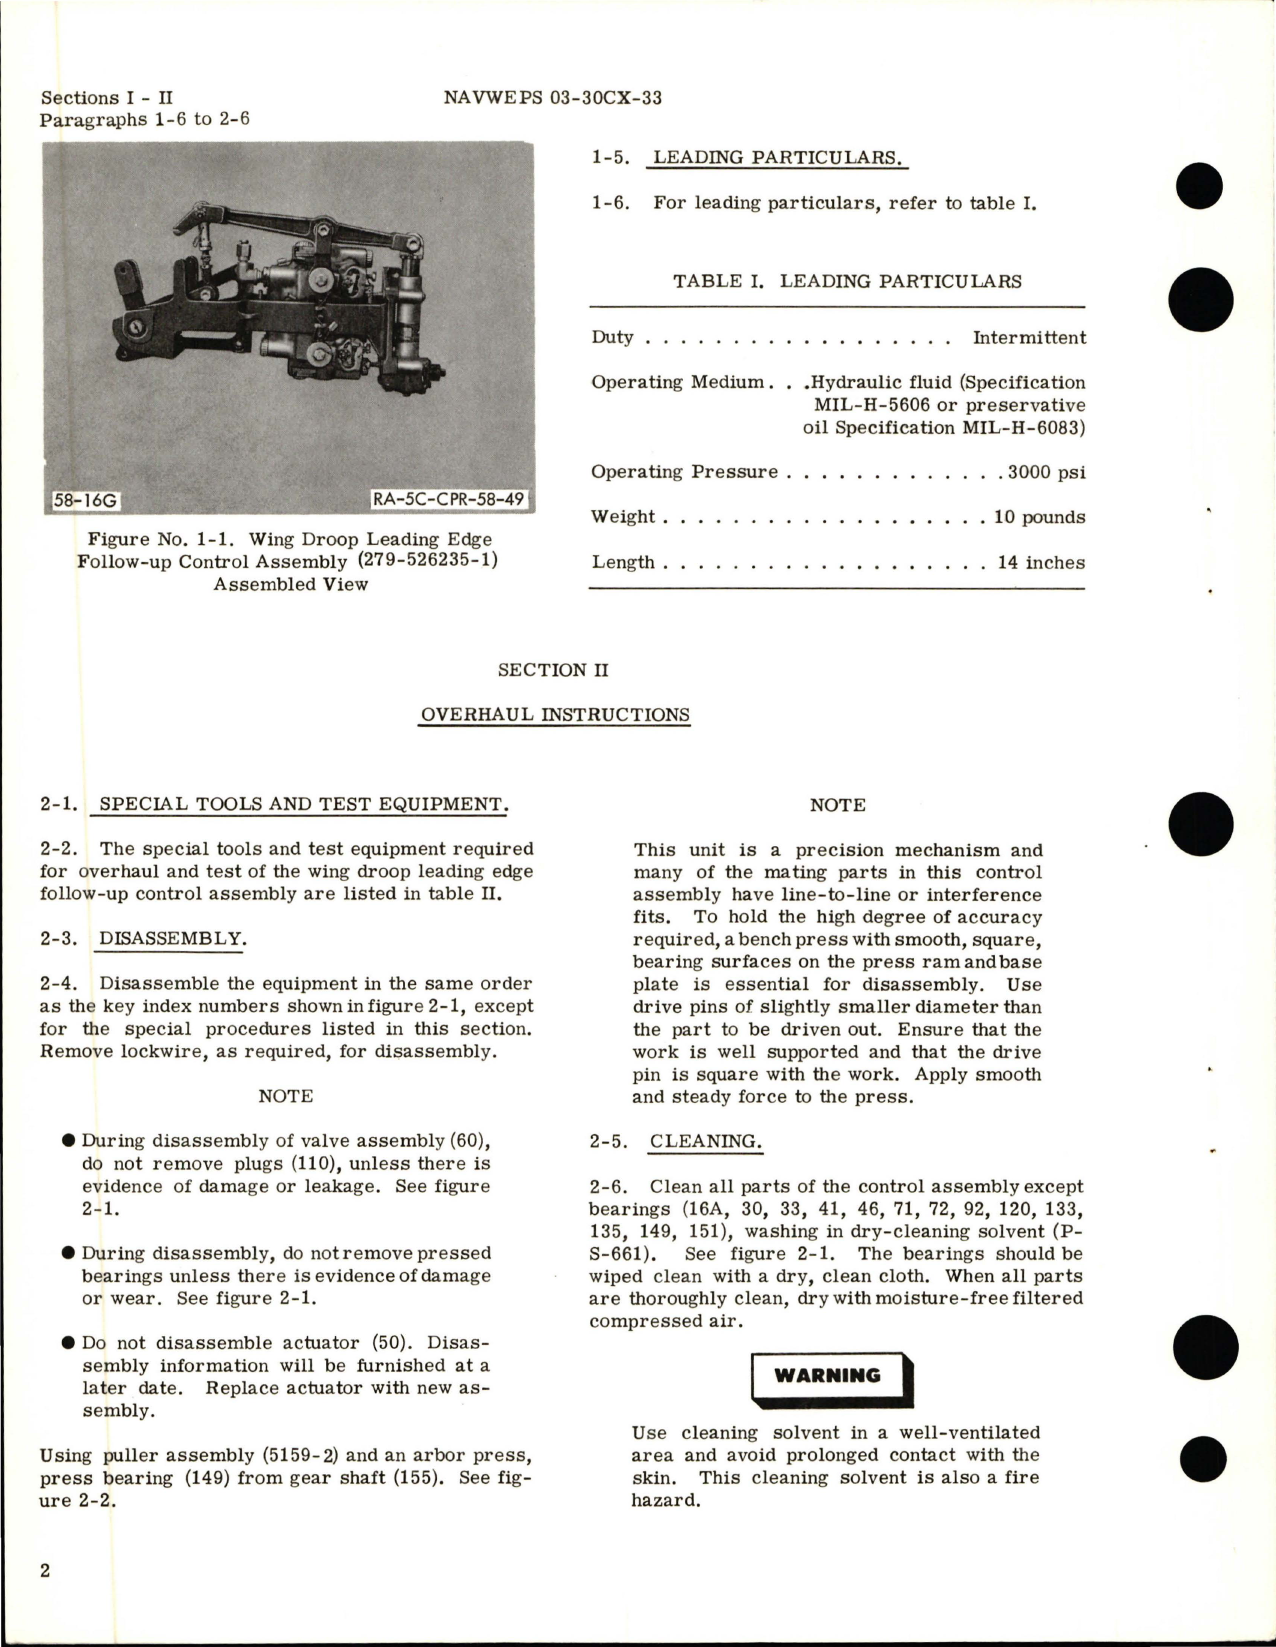 Sample page 5 from AirCorps Library document: Overhaul Instructions for Wing Droop Leading Edge Follow Up Control Assembly - Part 279-526235-1 